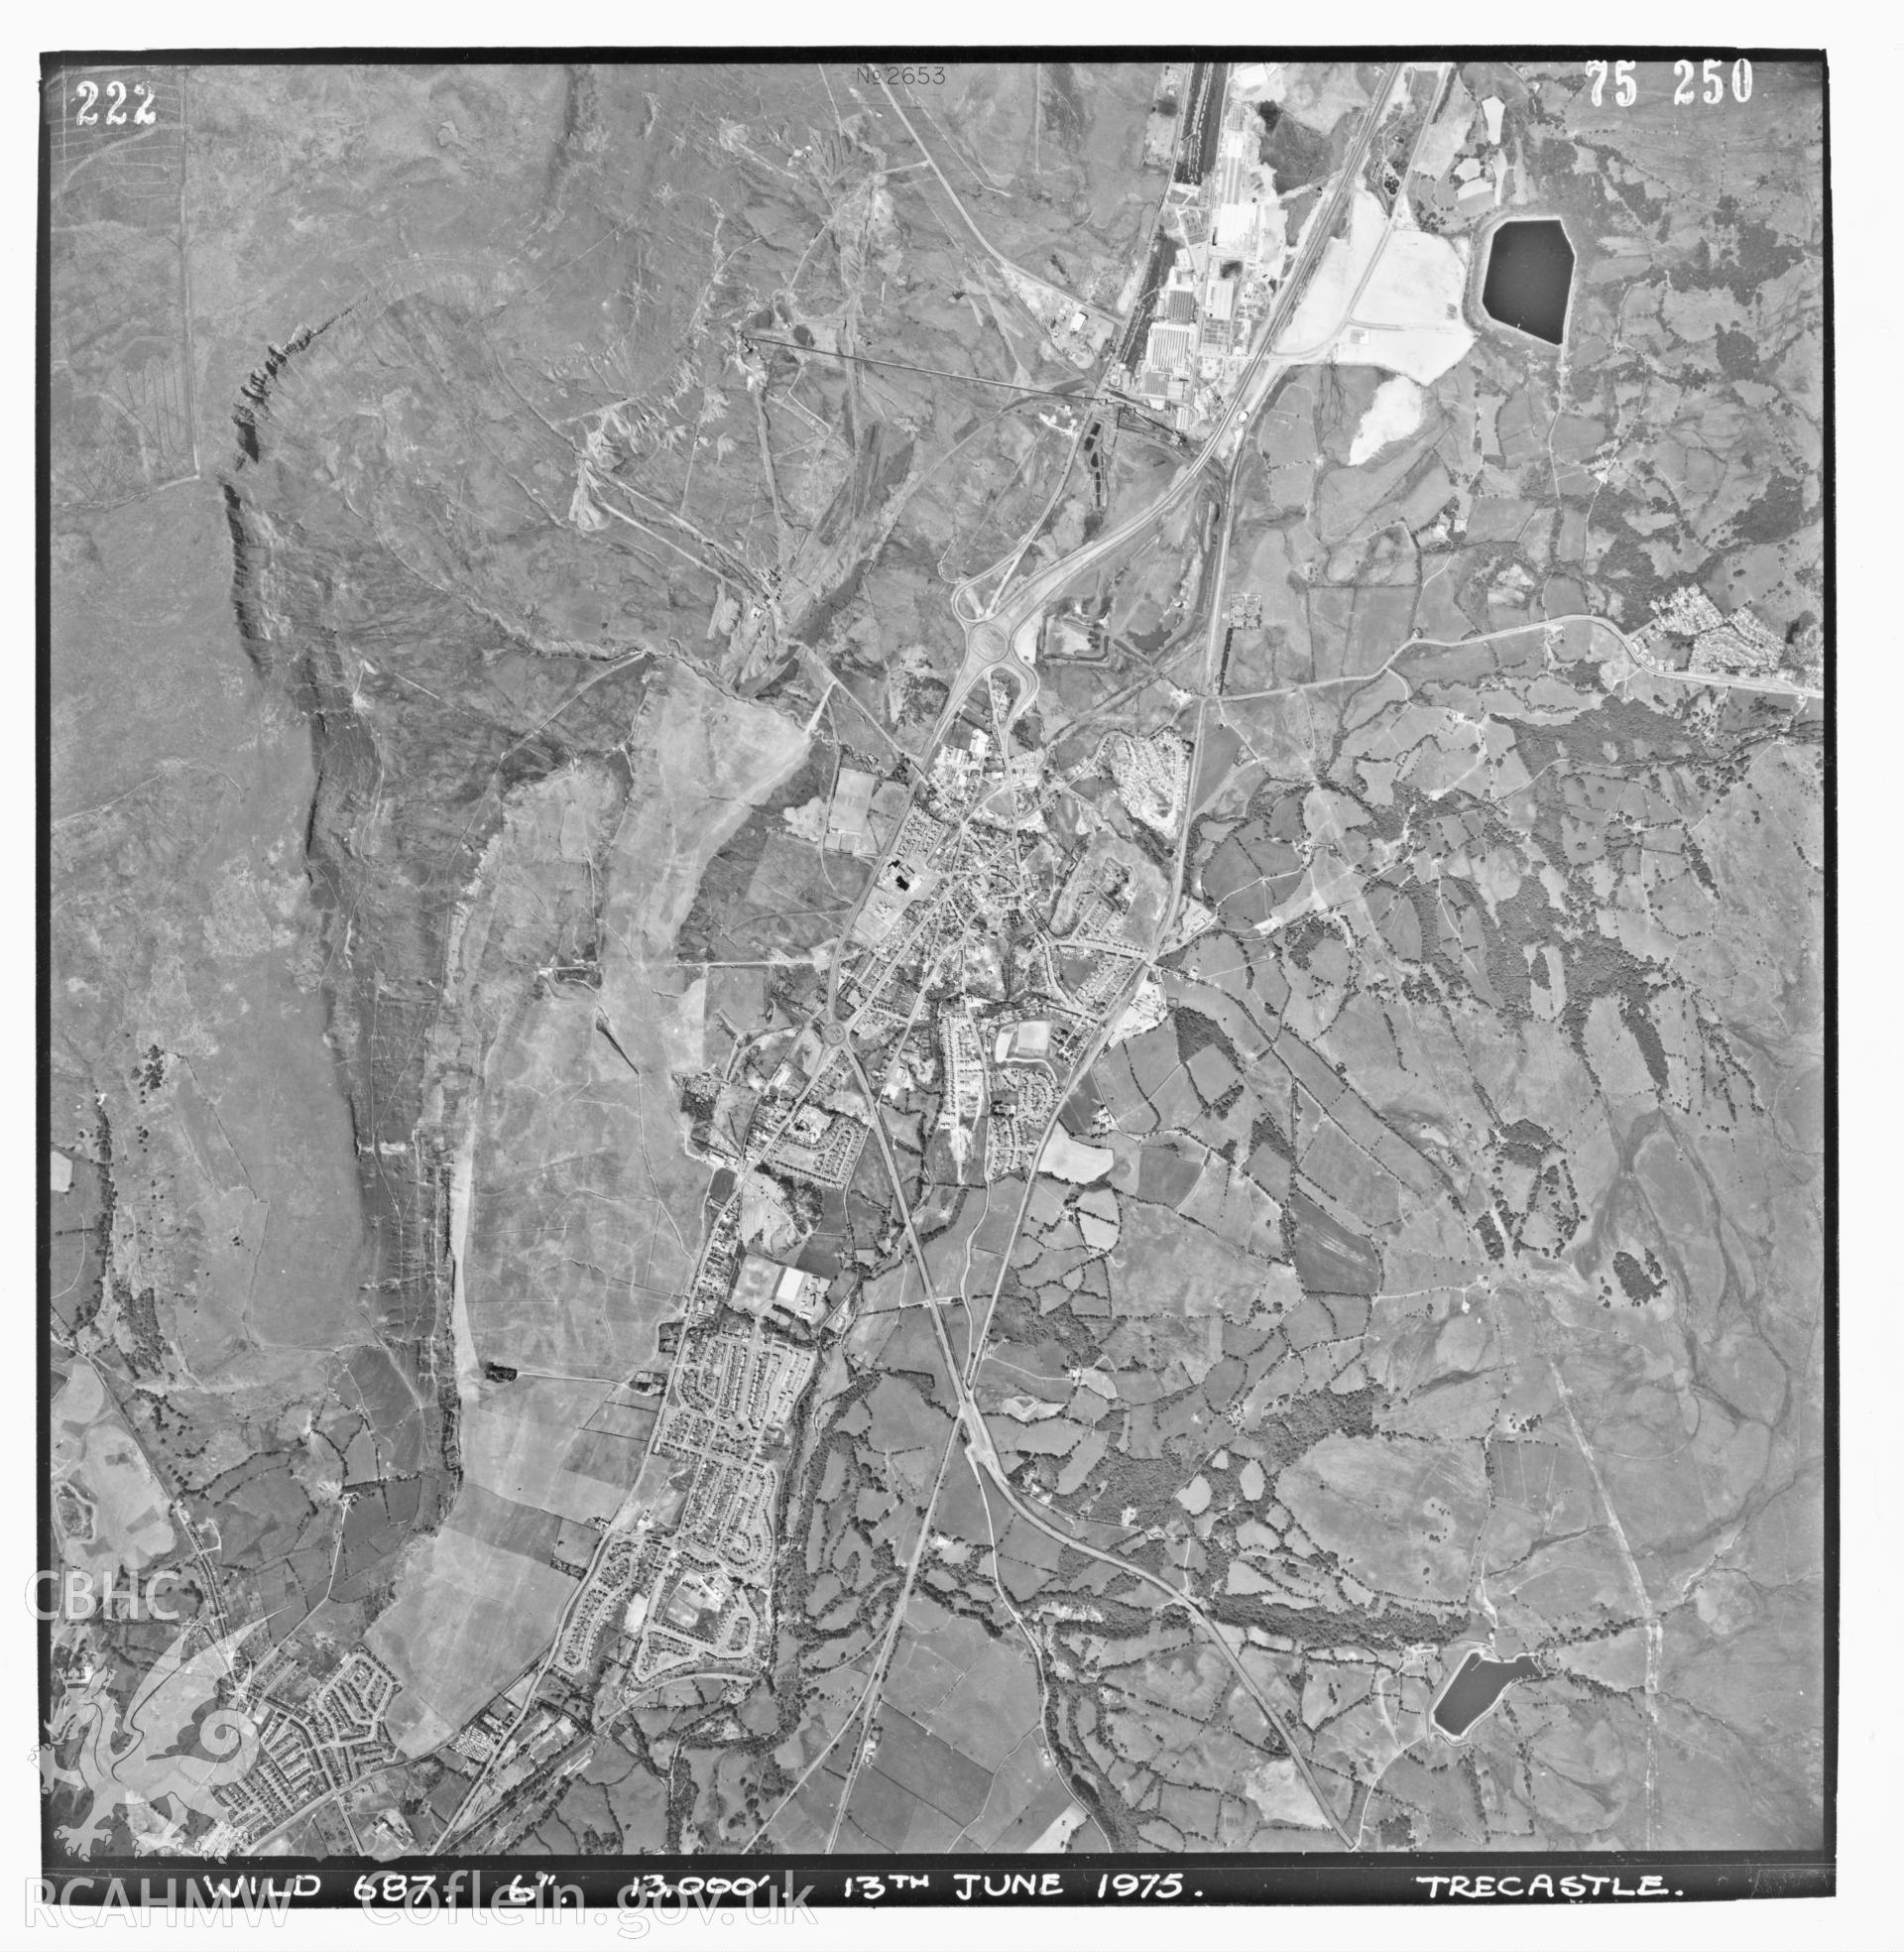 Digitized copy of an aerial photograph showing the Hirwaun area, taken by Ordnance Survey, 1975.